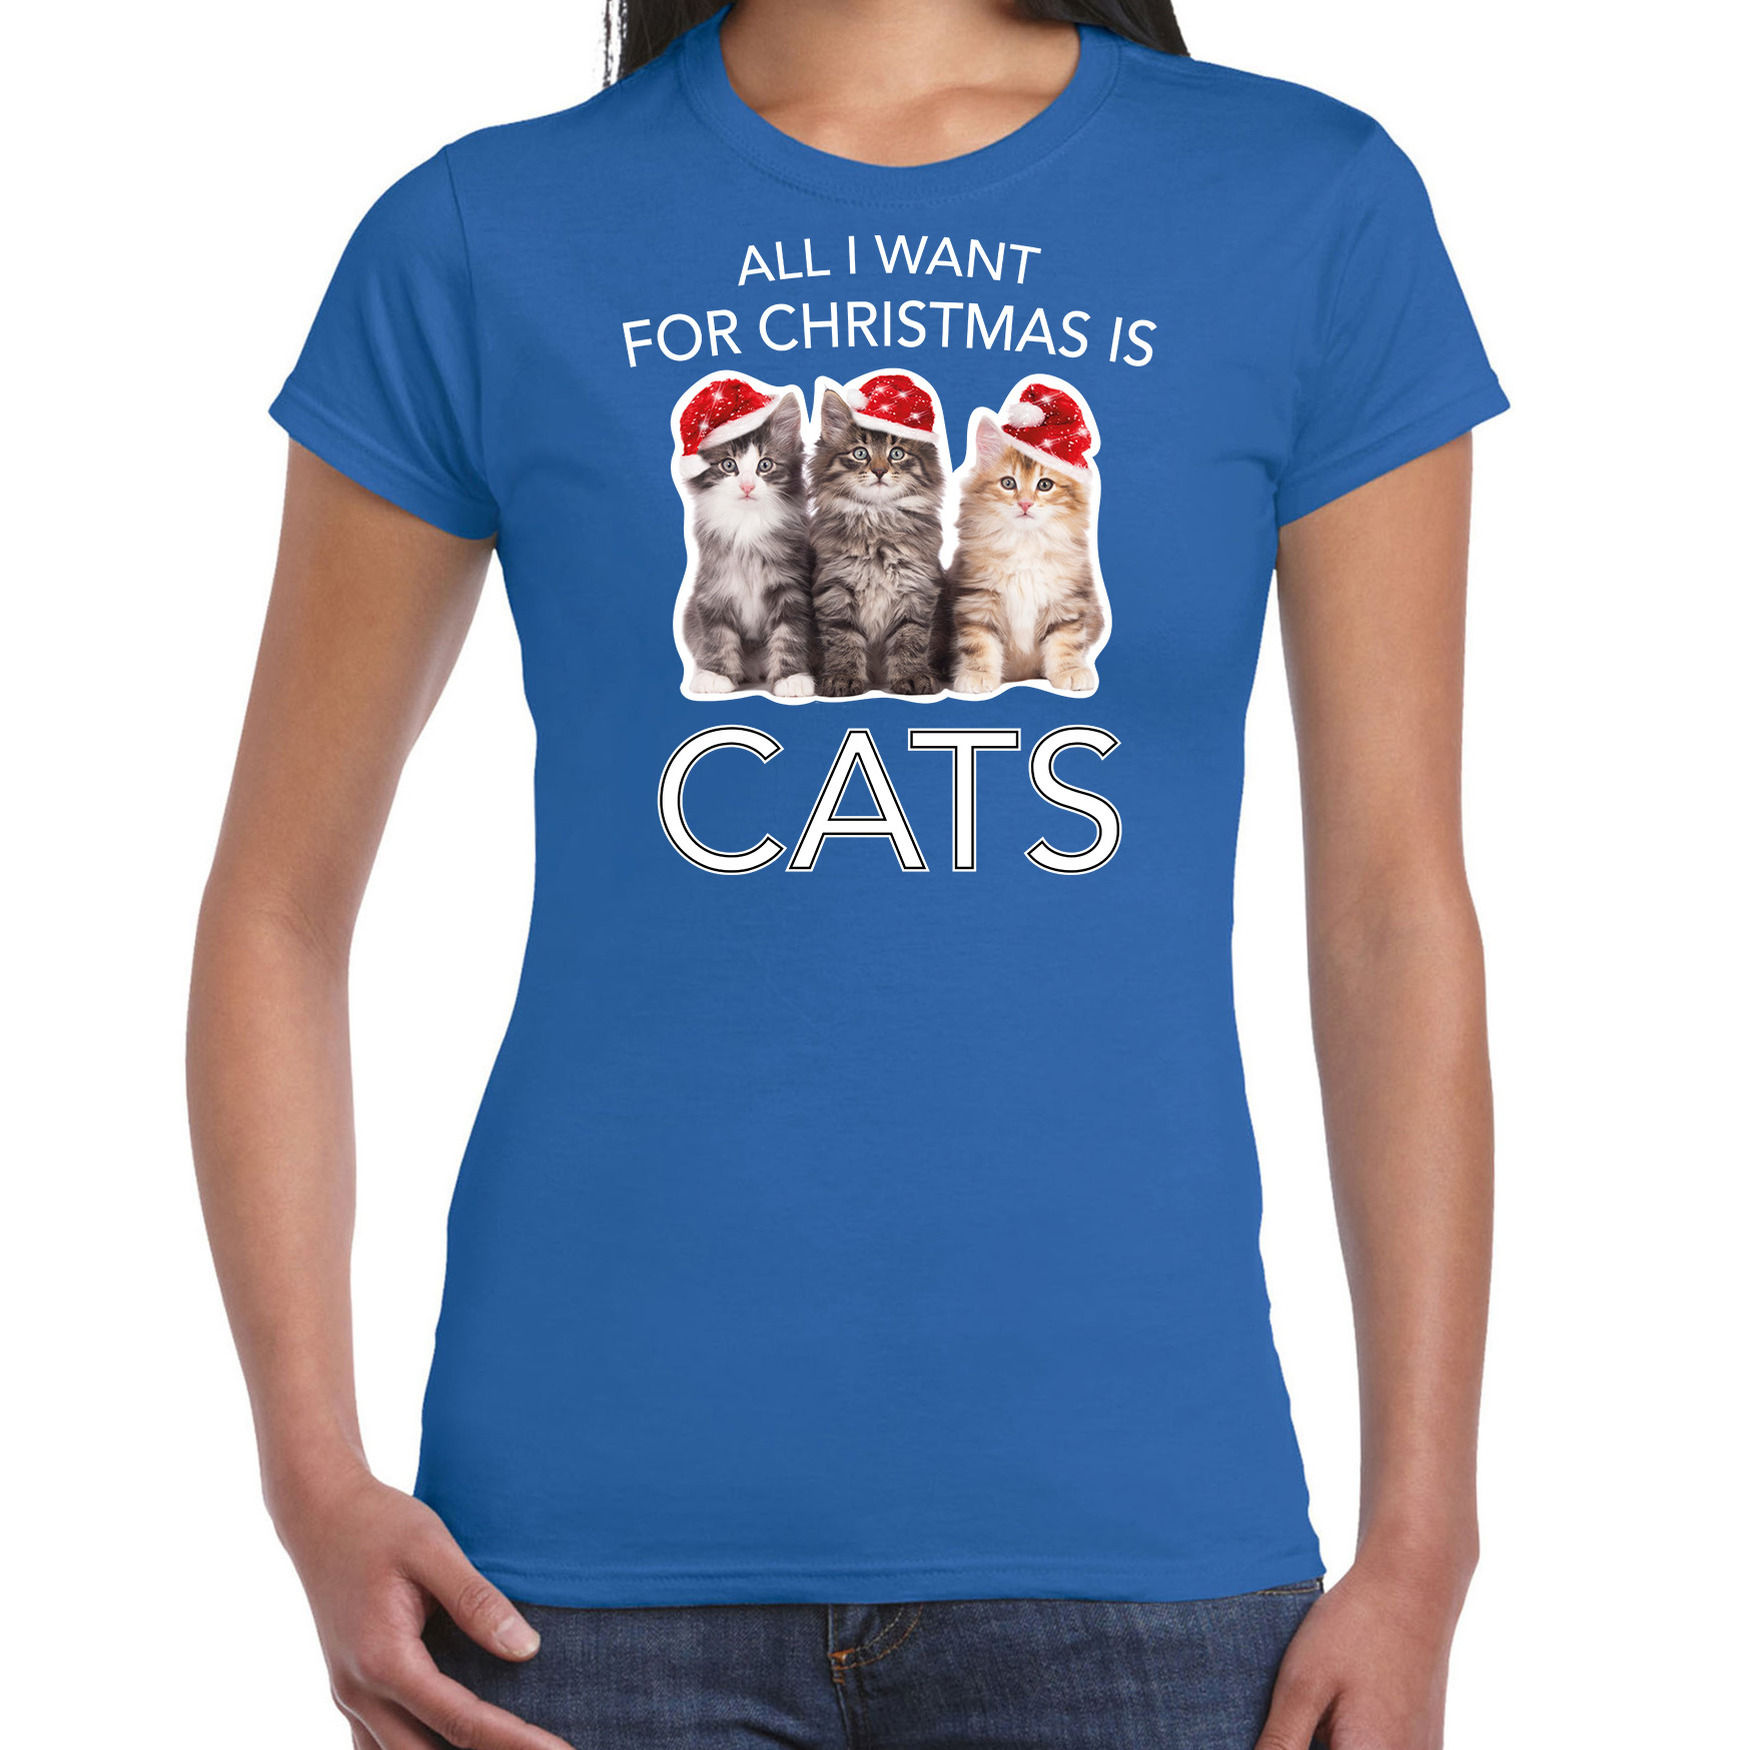 Blauw Kerstshirt-Kerstkleding All i want for Christmas is cats voor dames